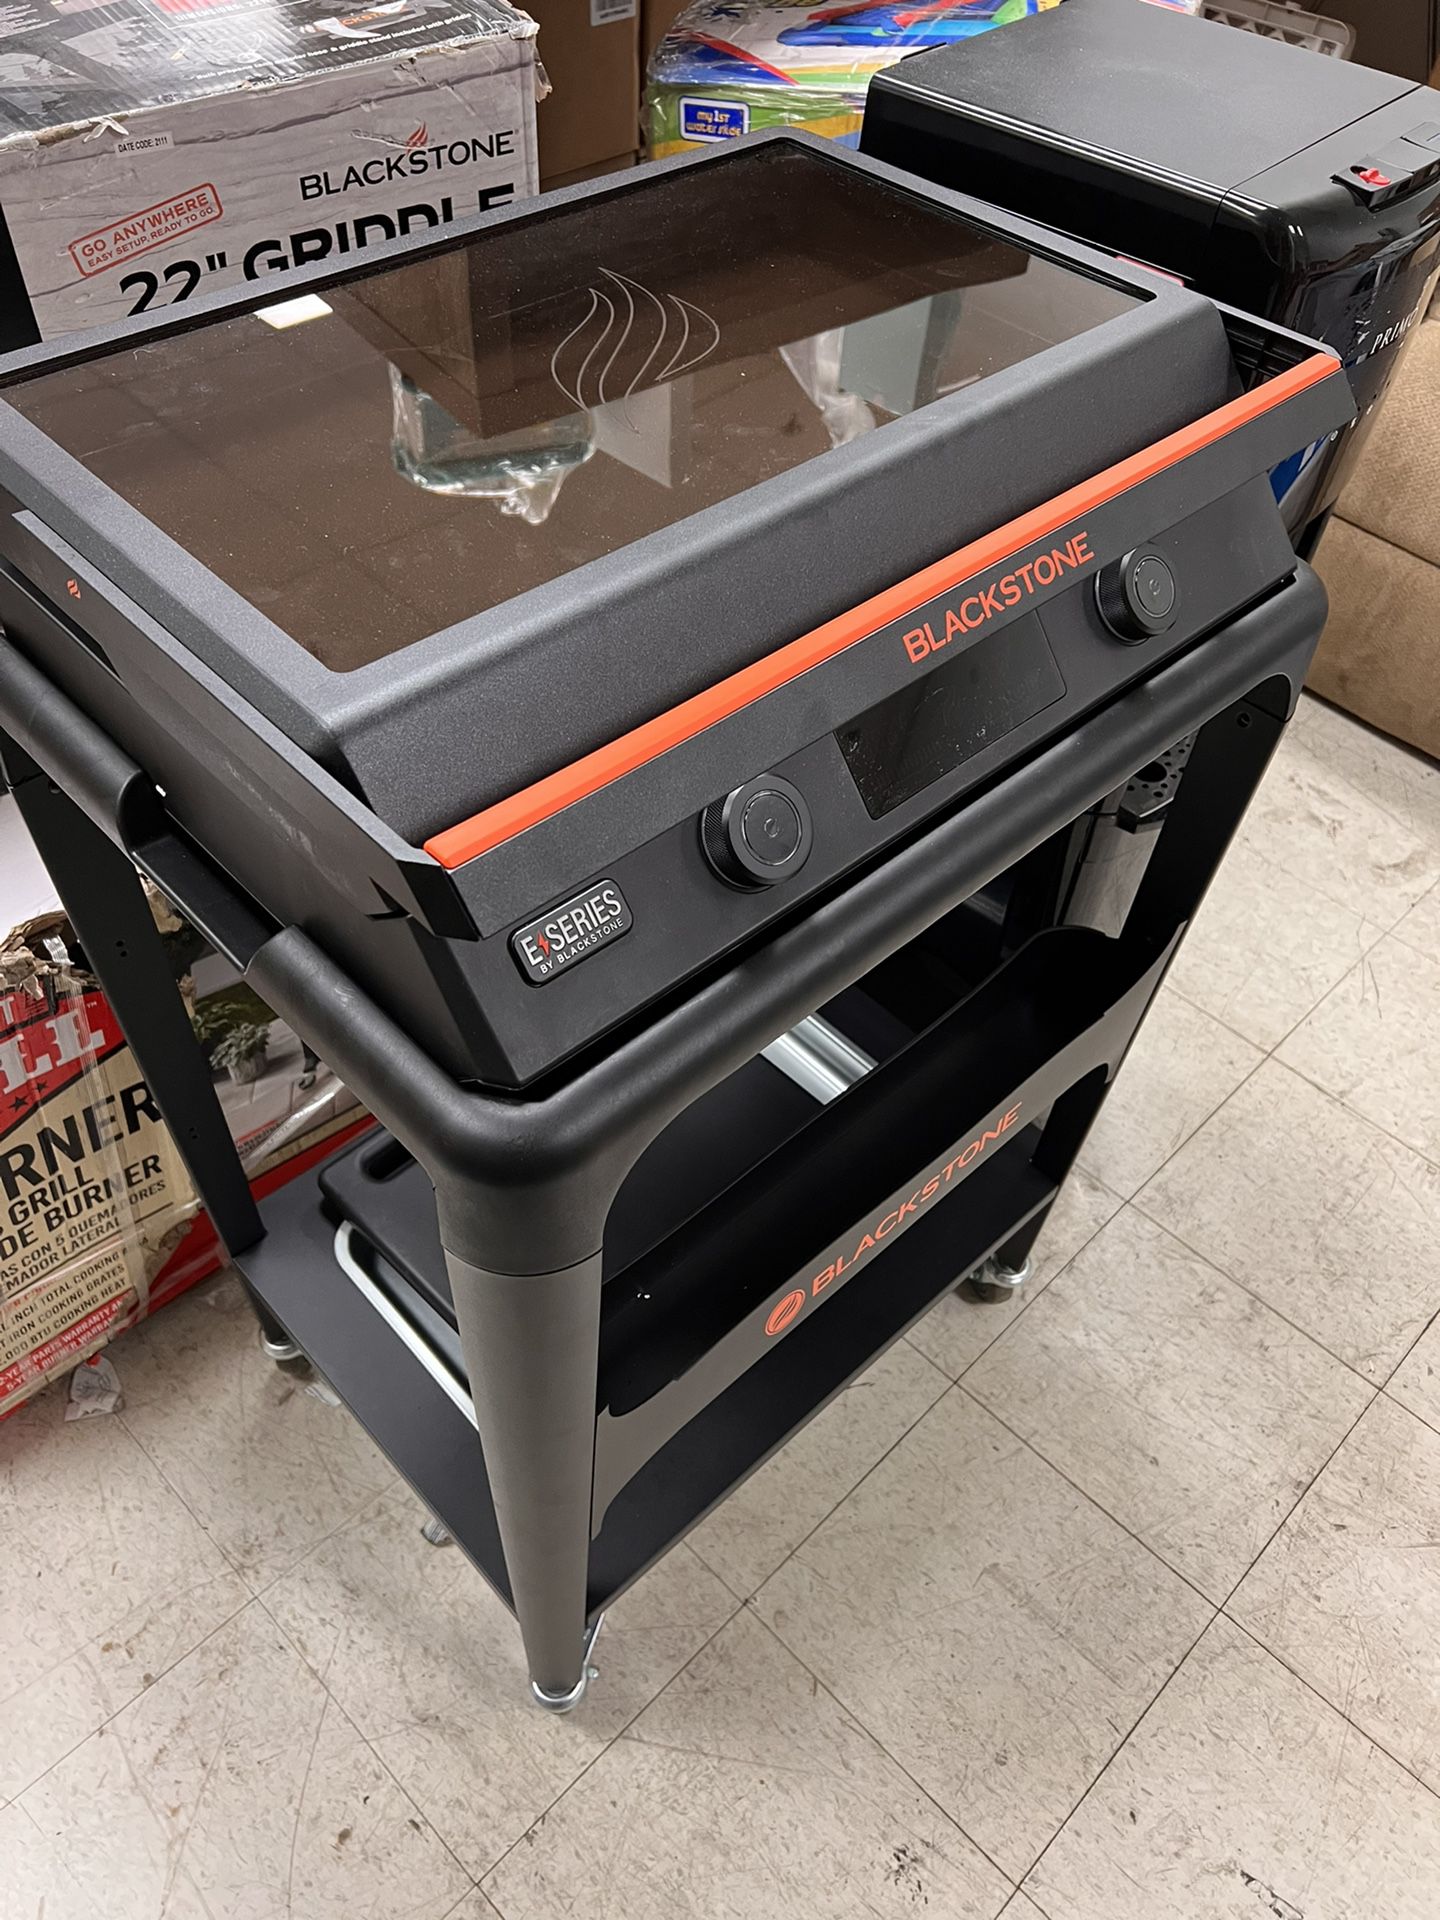 BLACK+DECKER Family-Sized Electric Griddle - Black - GD2011B for Sale in  Poway, CA - OfferUp